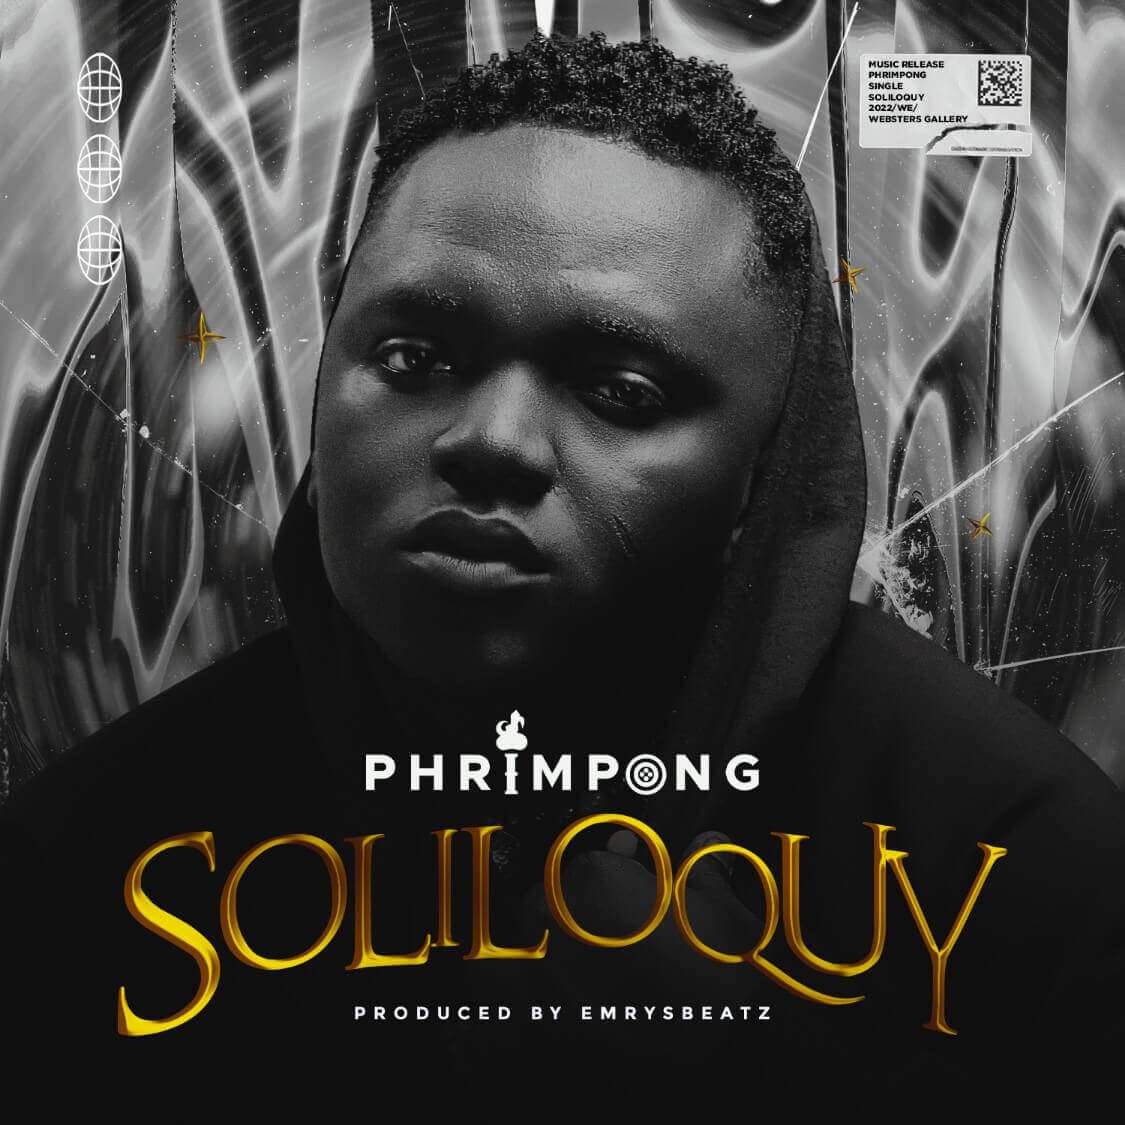 Watch: Phrimpong releases new Song and Video “Soliloquy”